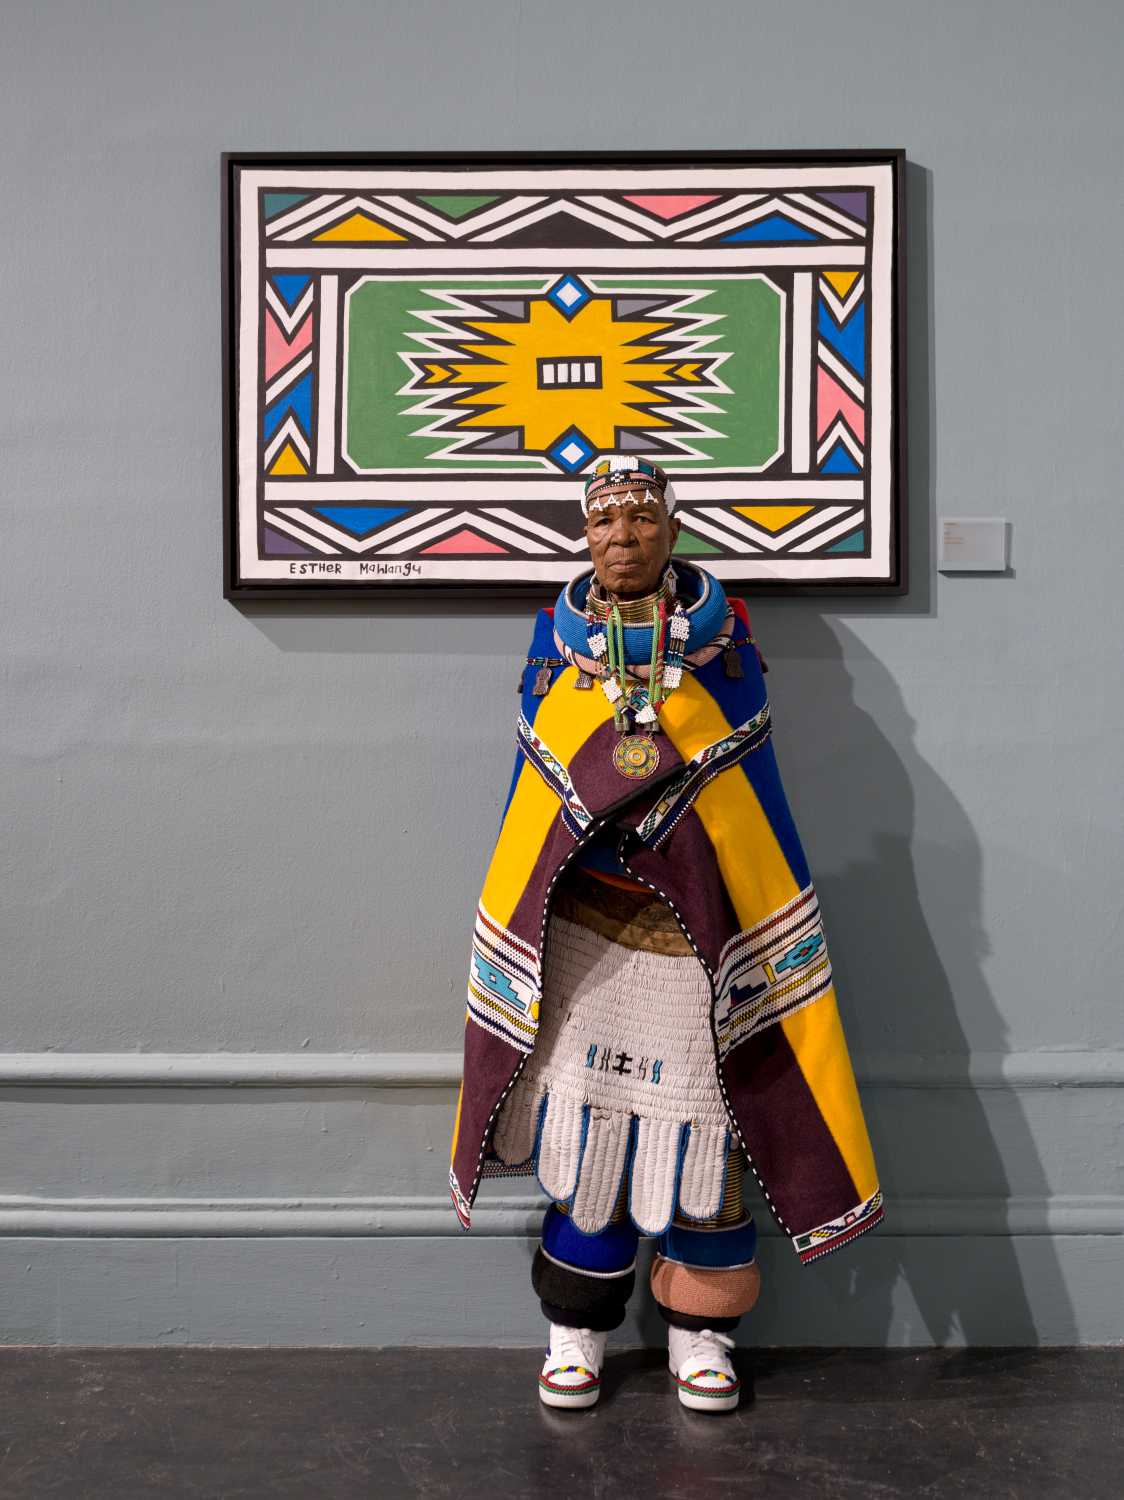 Artist Esther Mahlangu At The Exhibition Then I Knew I Was Good At